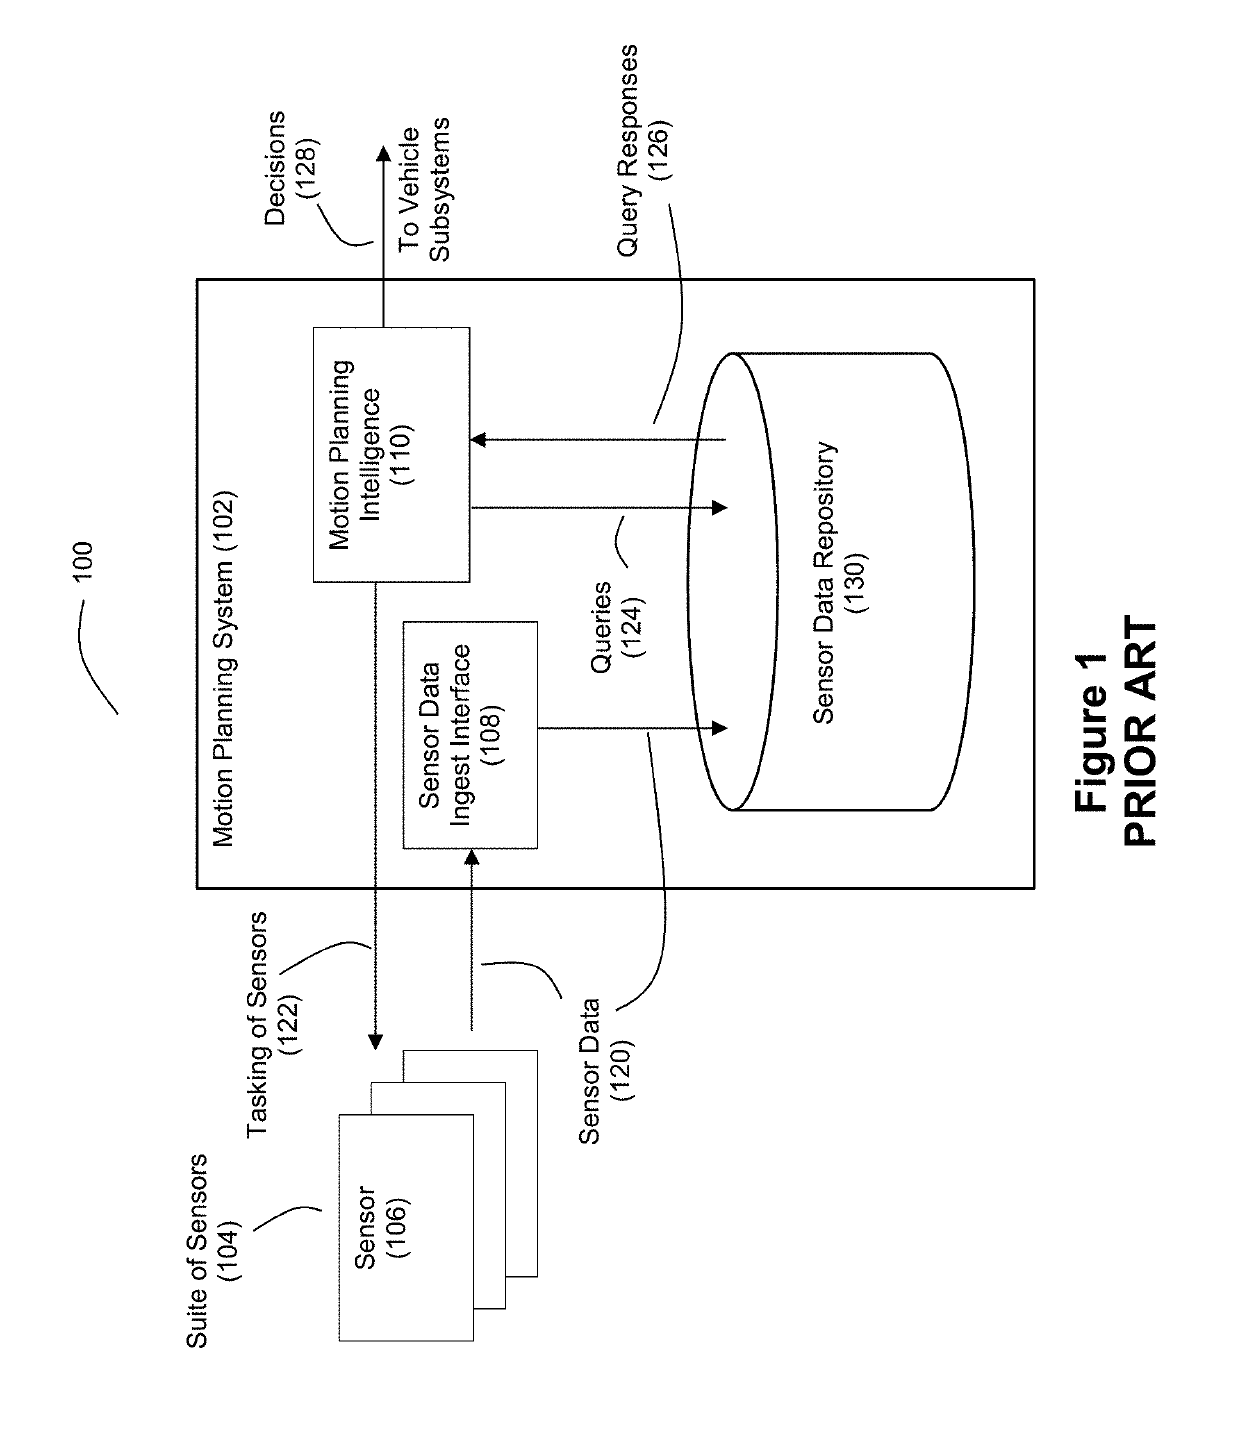 Intelligent ladar system with low latency motion planning updates